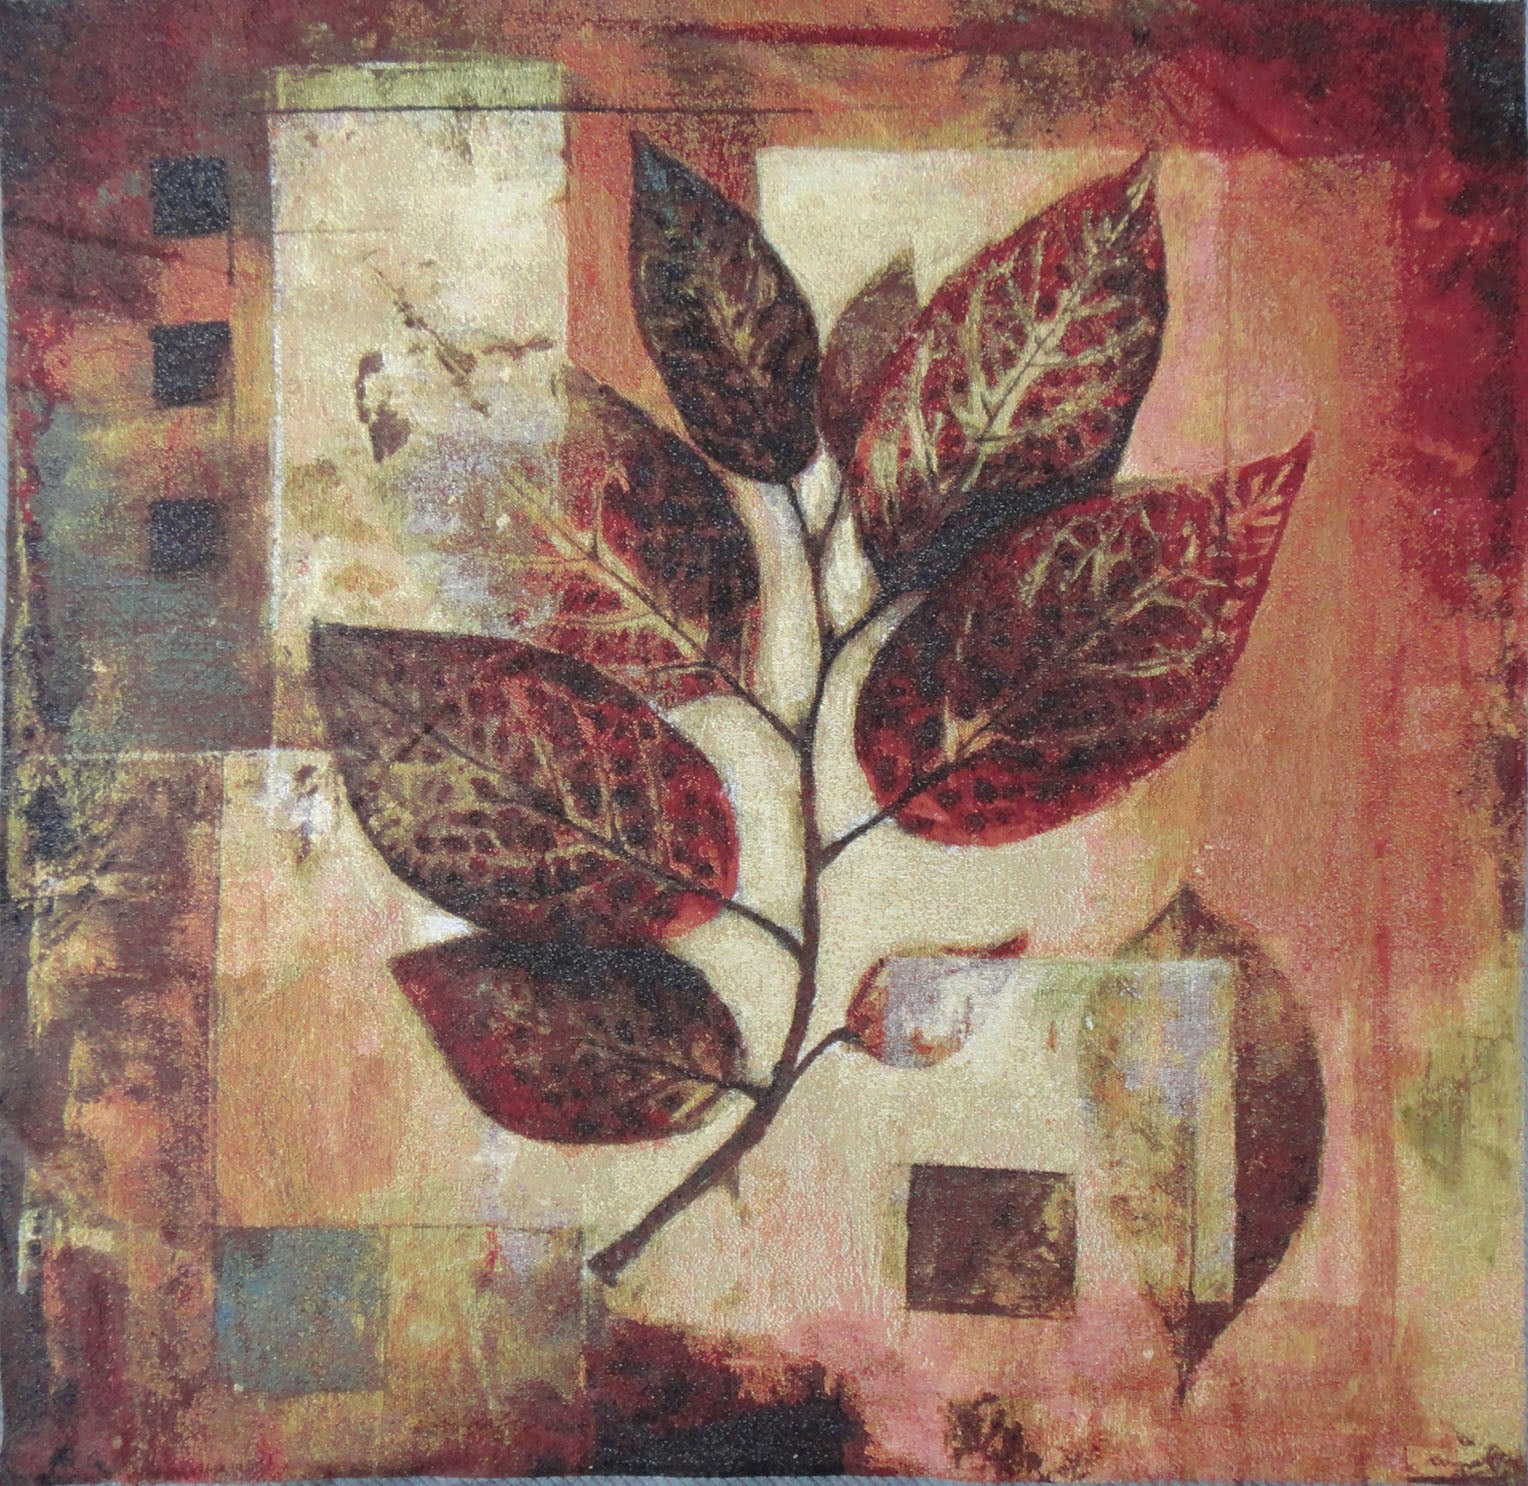 WH-LEAVES | LEAVES 39 X 39 " INCH WALL HANGING TAPESTRY ART - www.signareusa.com